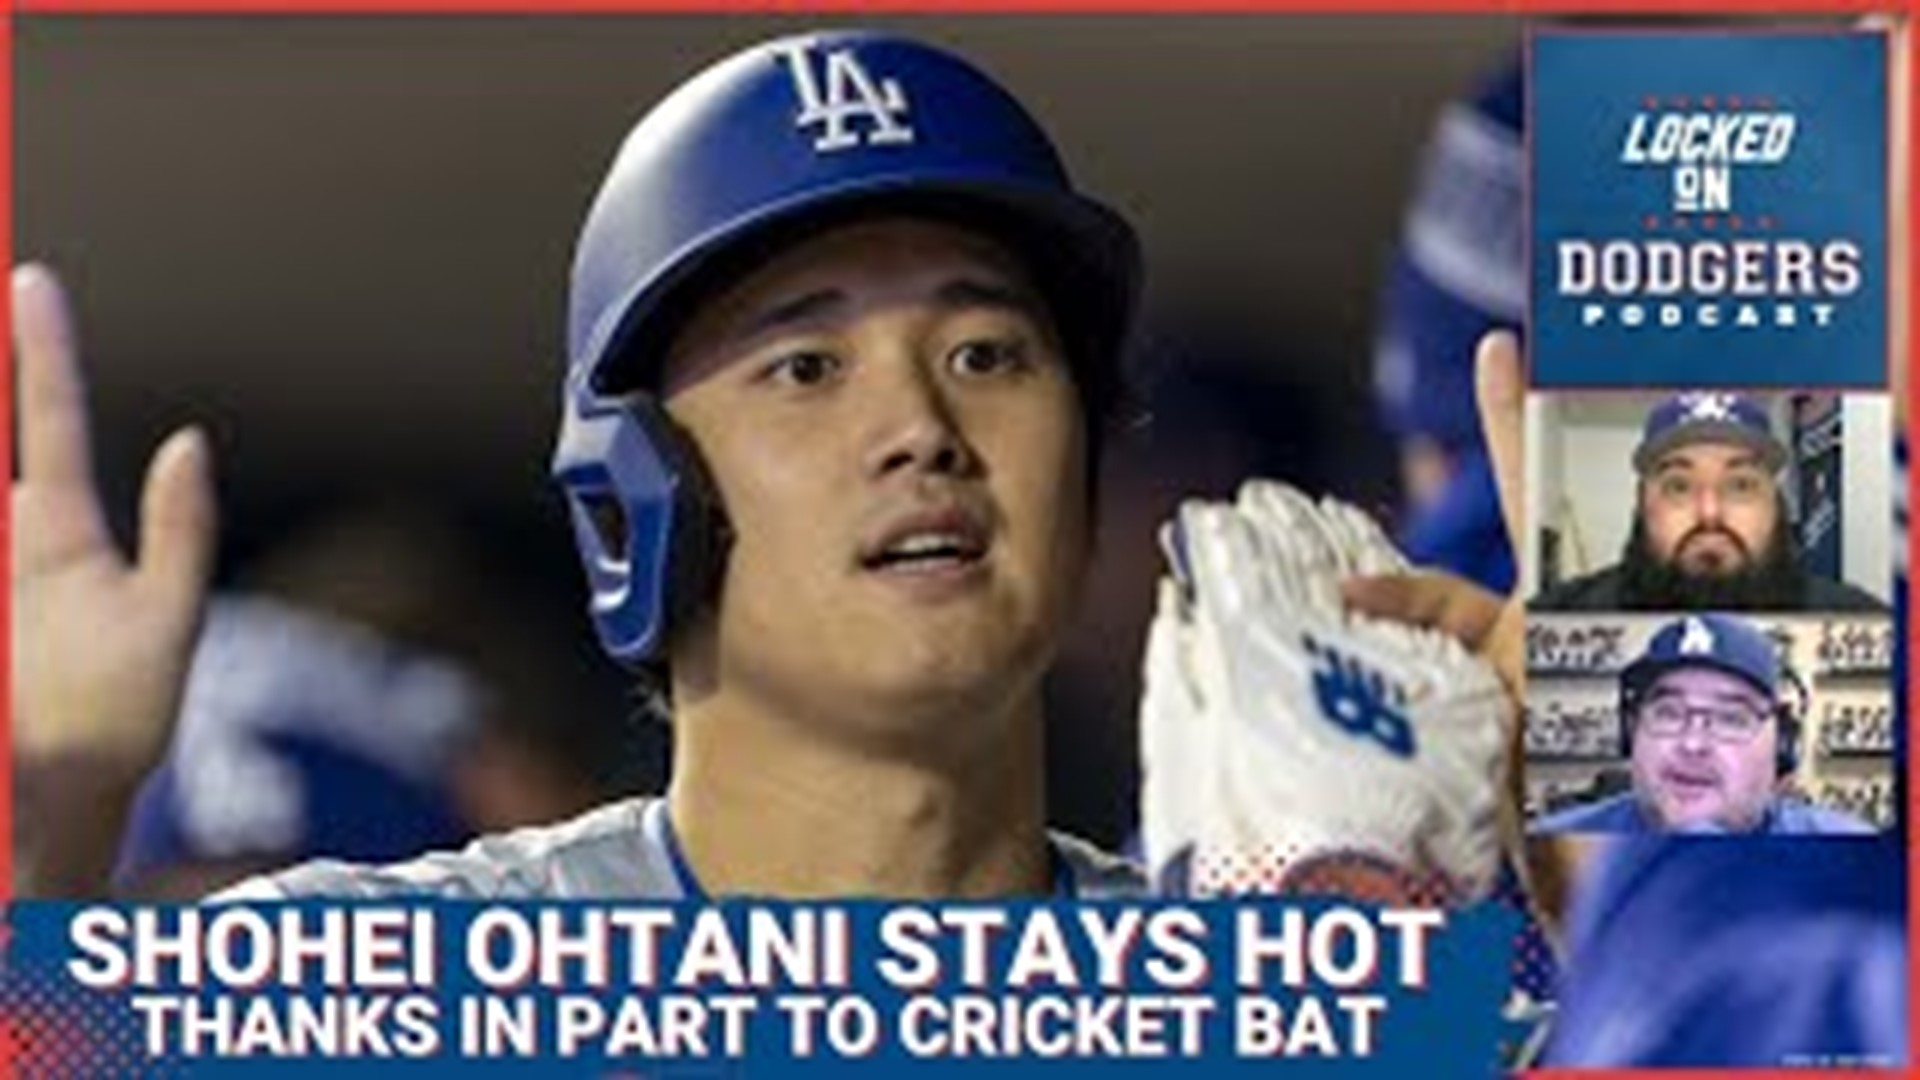 Shohei Ohtani is now the team leader and MLB leader in extra-base hits after picking up two doubles and a homer in a win over the Twins on Monday.